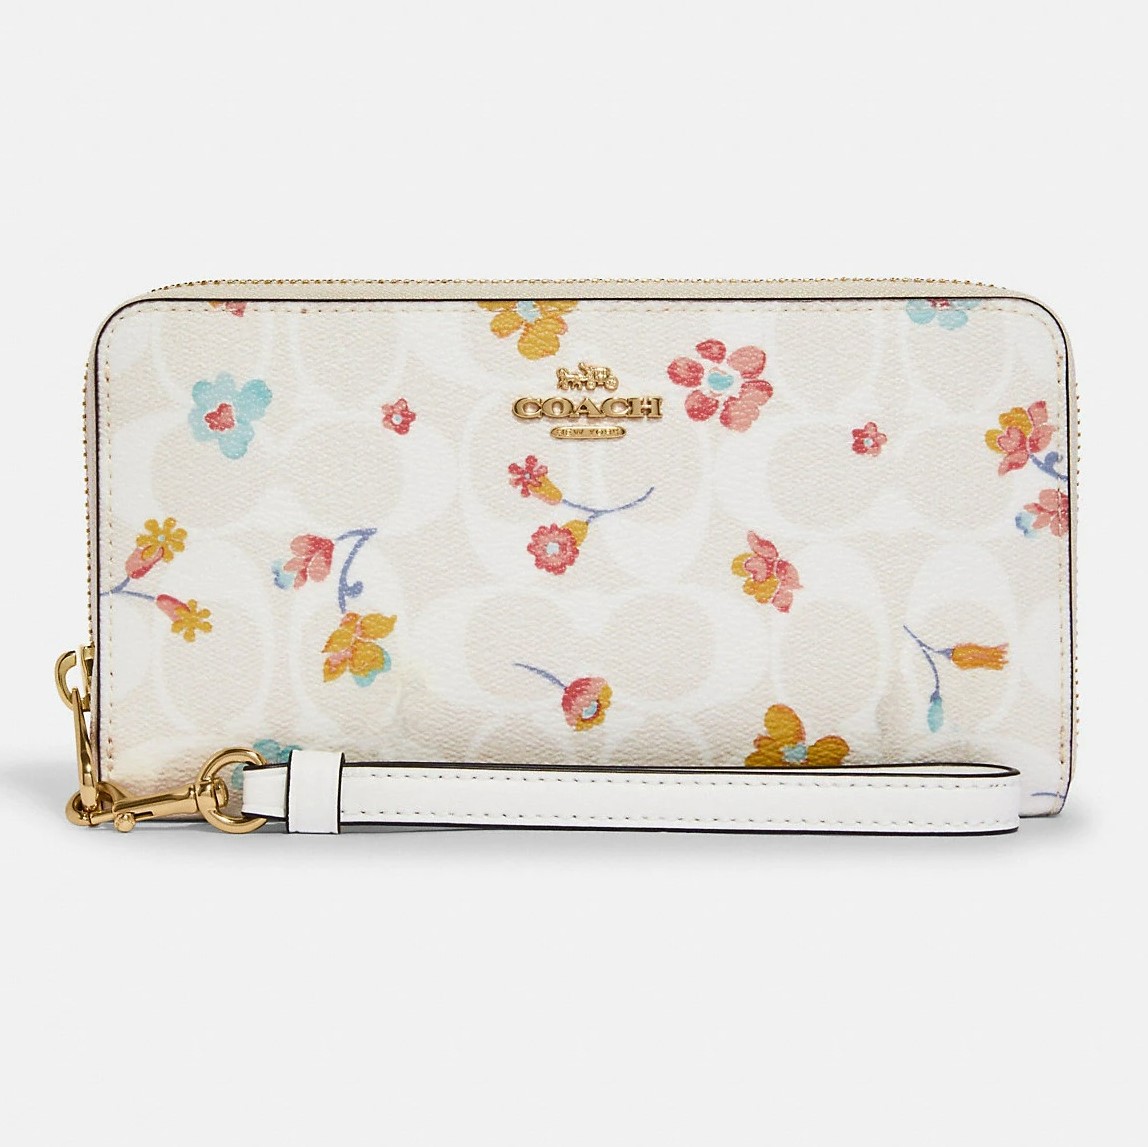 VÍ COACH NỮ LONG ZIP AROUND WALLET IN SIGNATURE CANVAS WITH MYSTICAL FLORAL PRINT 1